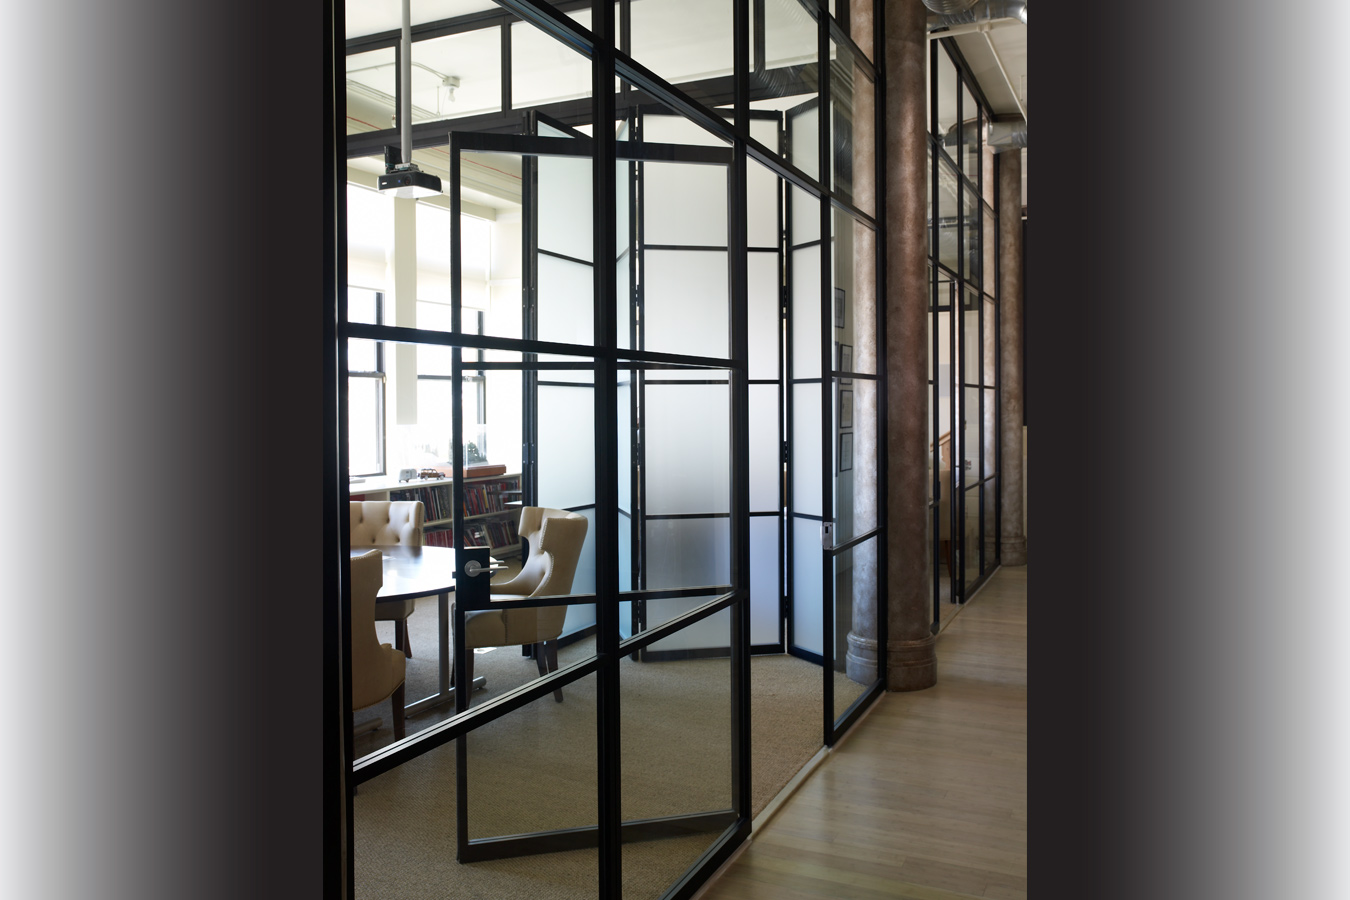 Interior Space Management | David Easton and Eric J Smith Architect, Union Square, NYC | Fixed Panels, Swing Doors, Folding Wall